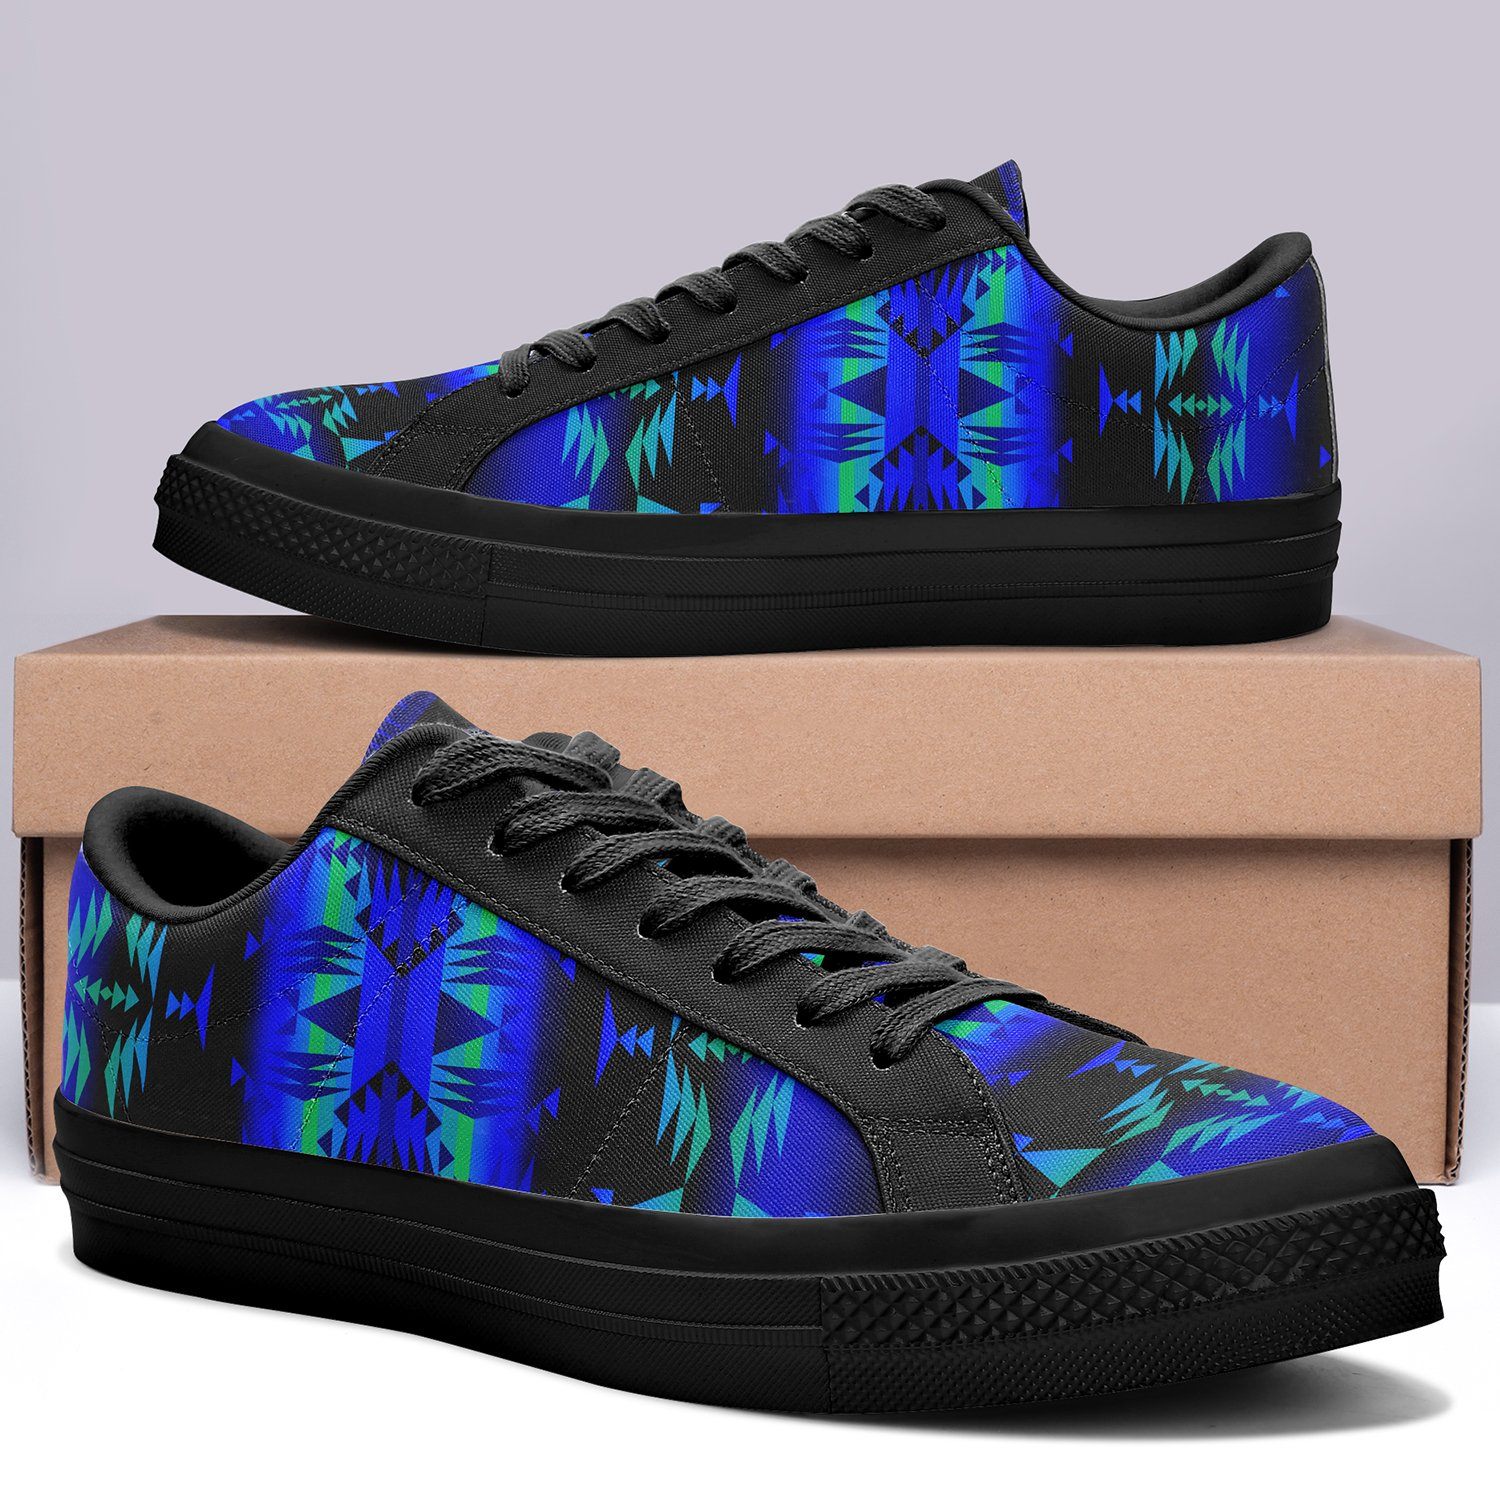 Between the Blue Ridge Mountains Aapisi Low Top Canvas Shoes Black Sole 49 Dzine 